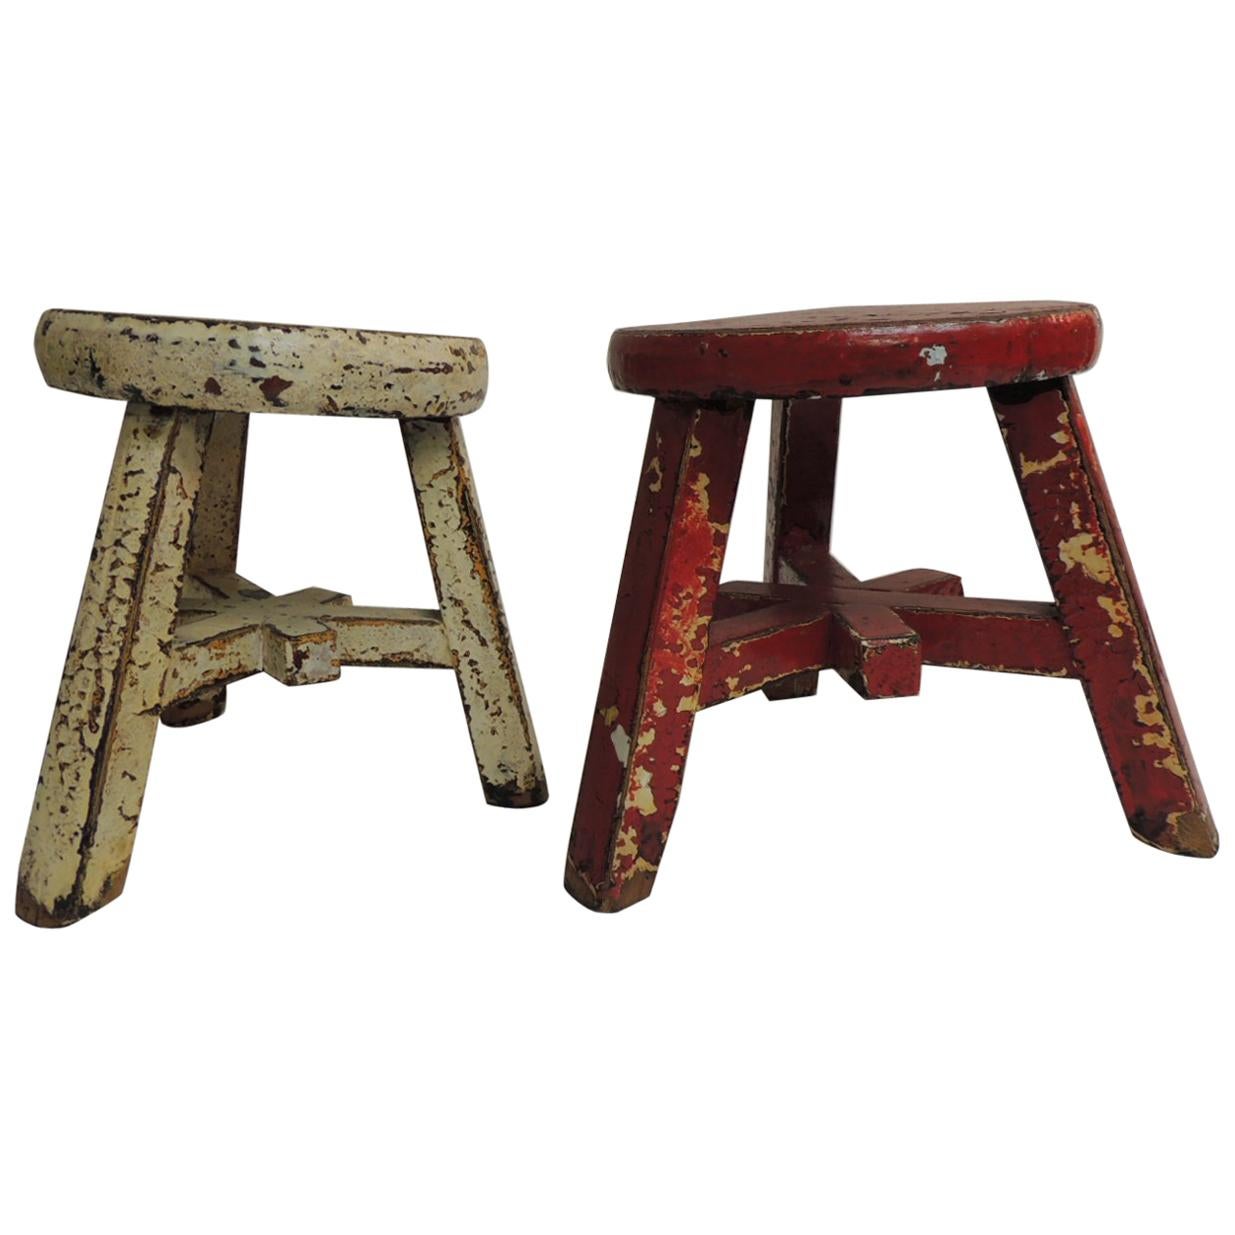 Pair of Small Asian Yellow and Red Lacquered Round Low Stools